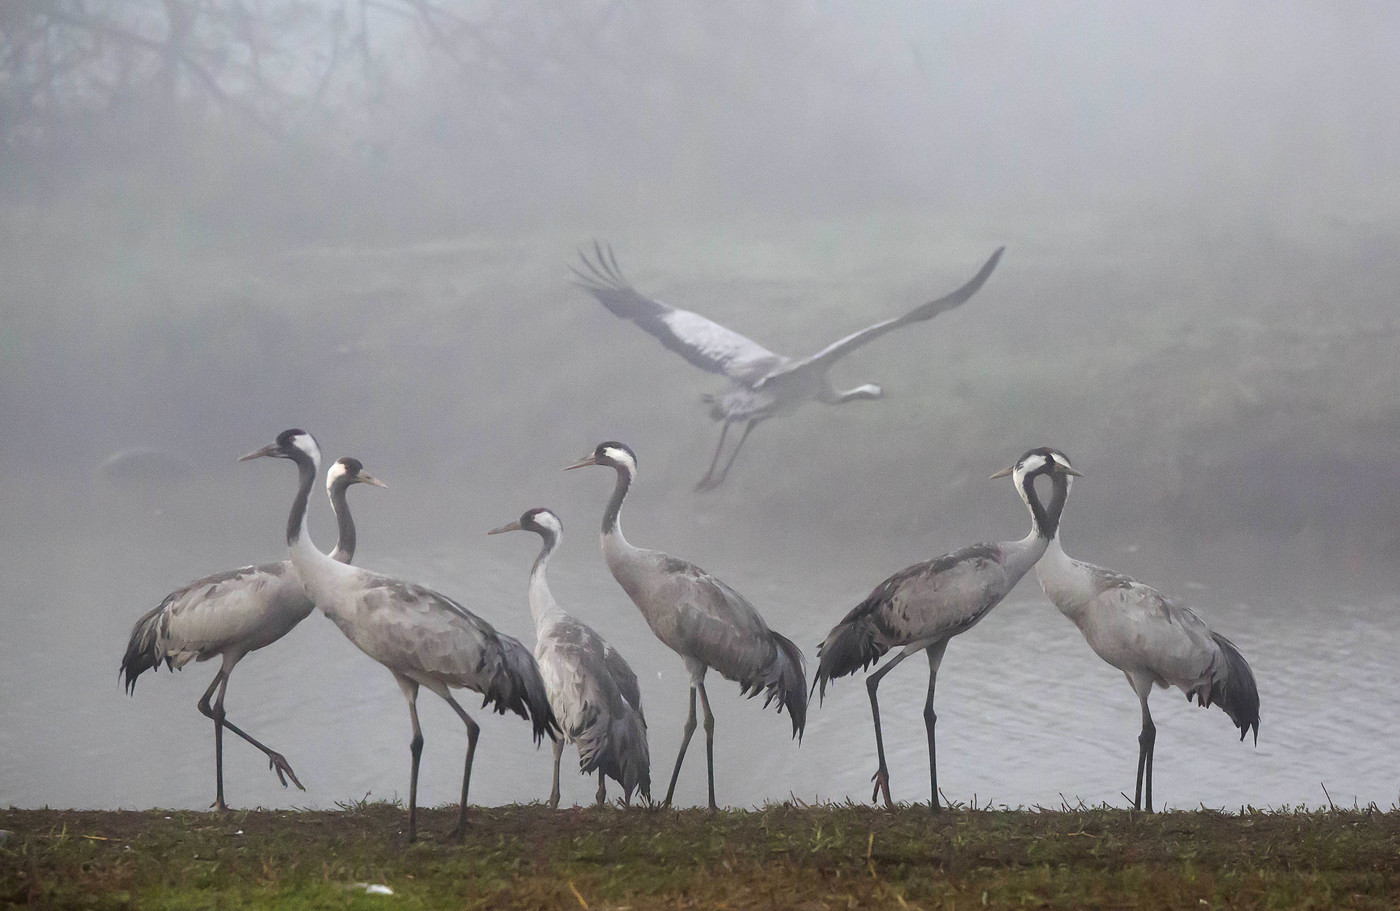 Israel: Cranes in the Hula Valley